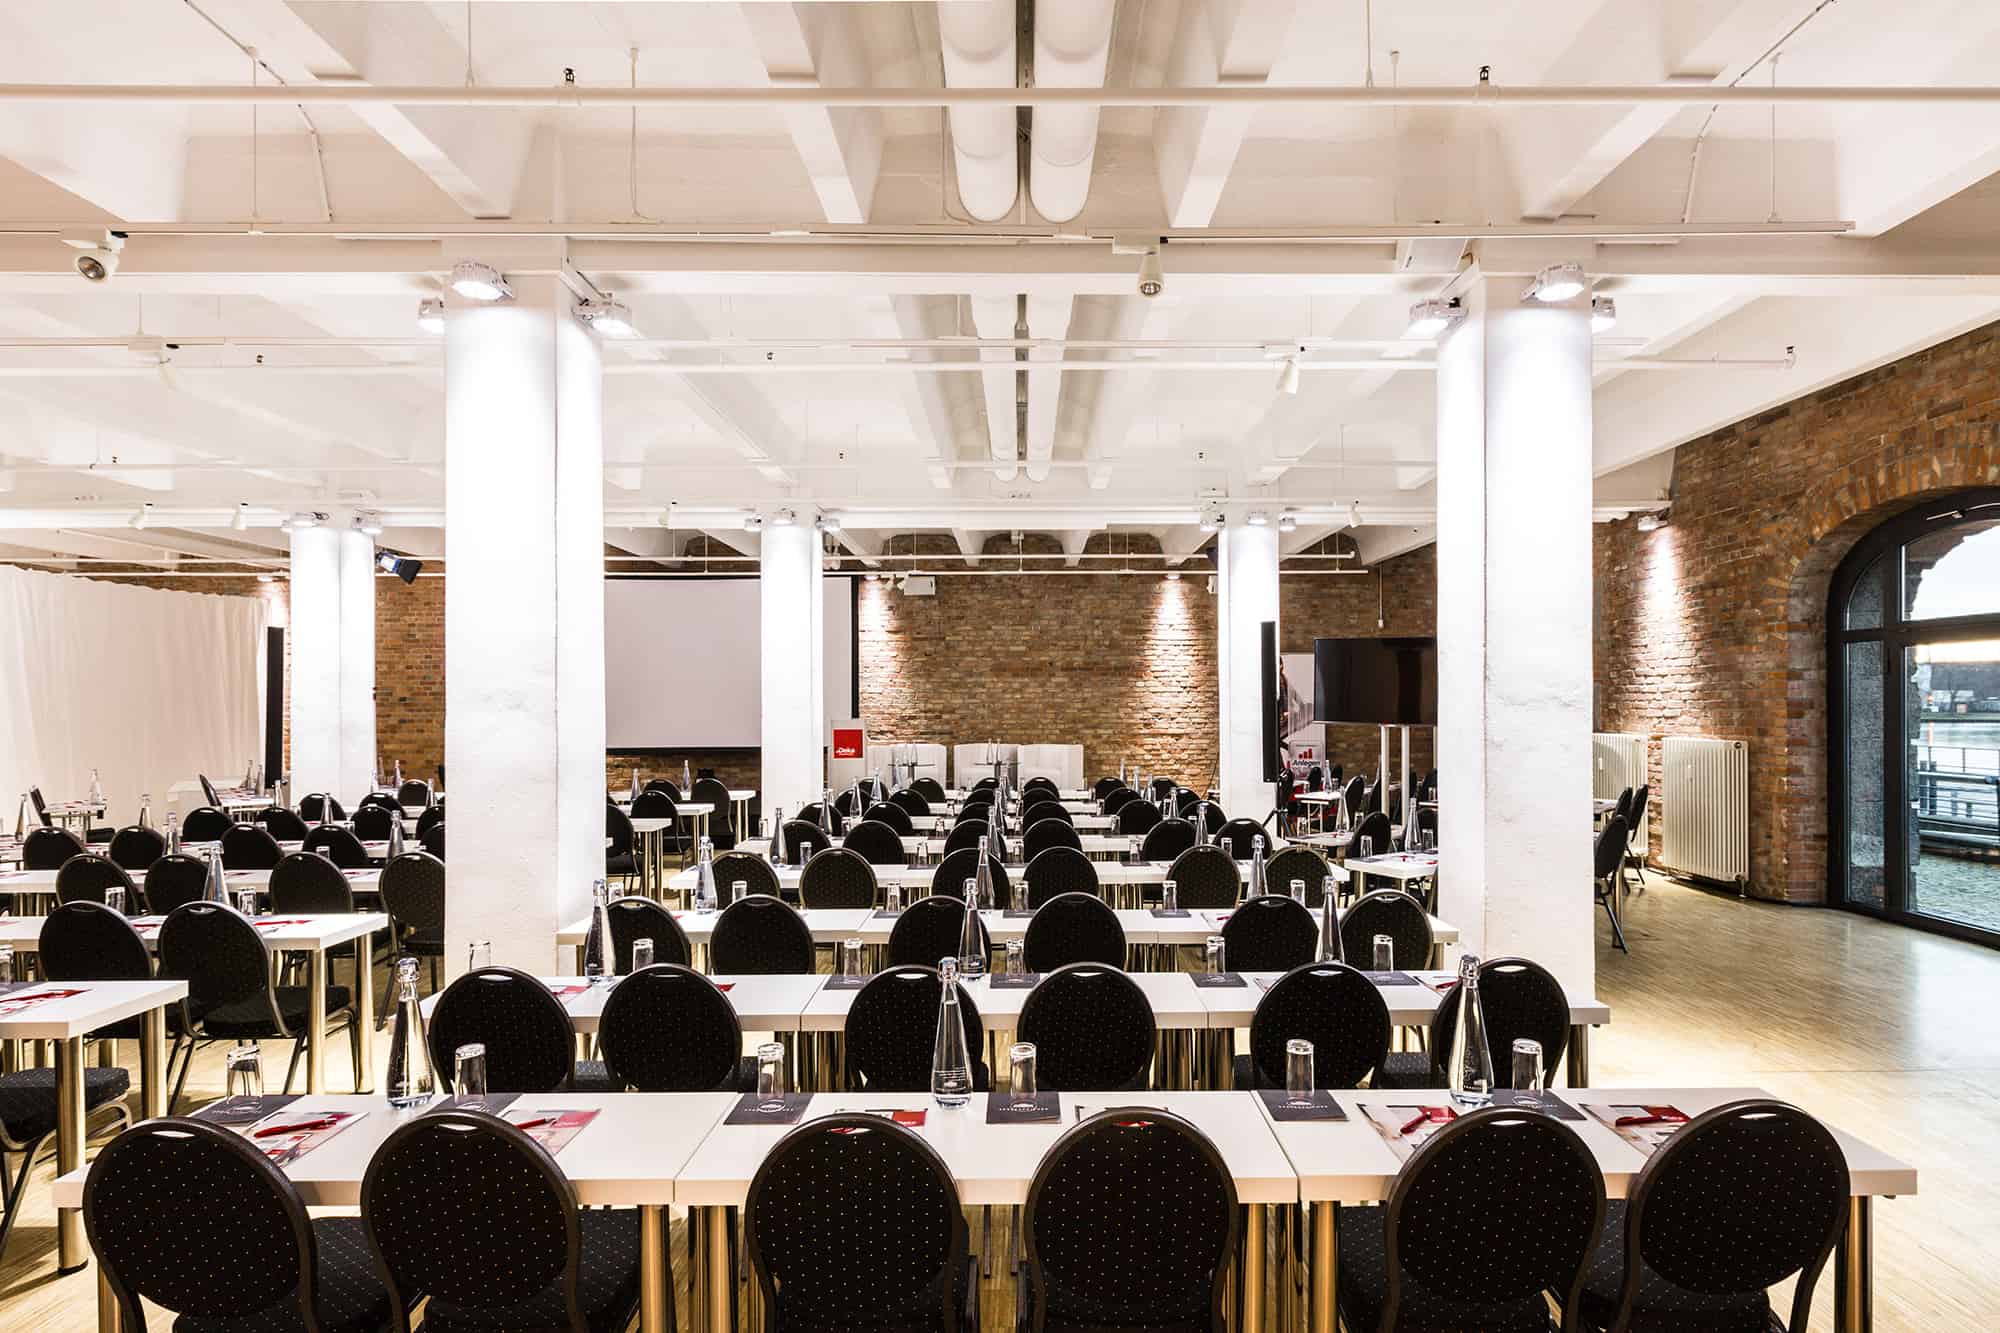 <div><strong>030 Eventloft Grande 300 m²</strong><br> up to 225 people<br> <br><span class='text-sm'> ✓ HD projector with HDMI connection<br> ✓ Access to the Spree Terrace<br> ✓ Conference chairs<br><br></span><strong>3.000€ room rental</strong><br><span class='text-sm'>zzgl. plus additional costs<br></span></div>